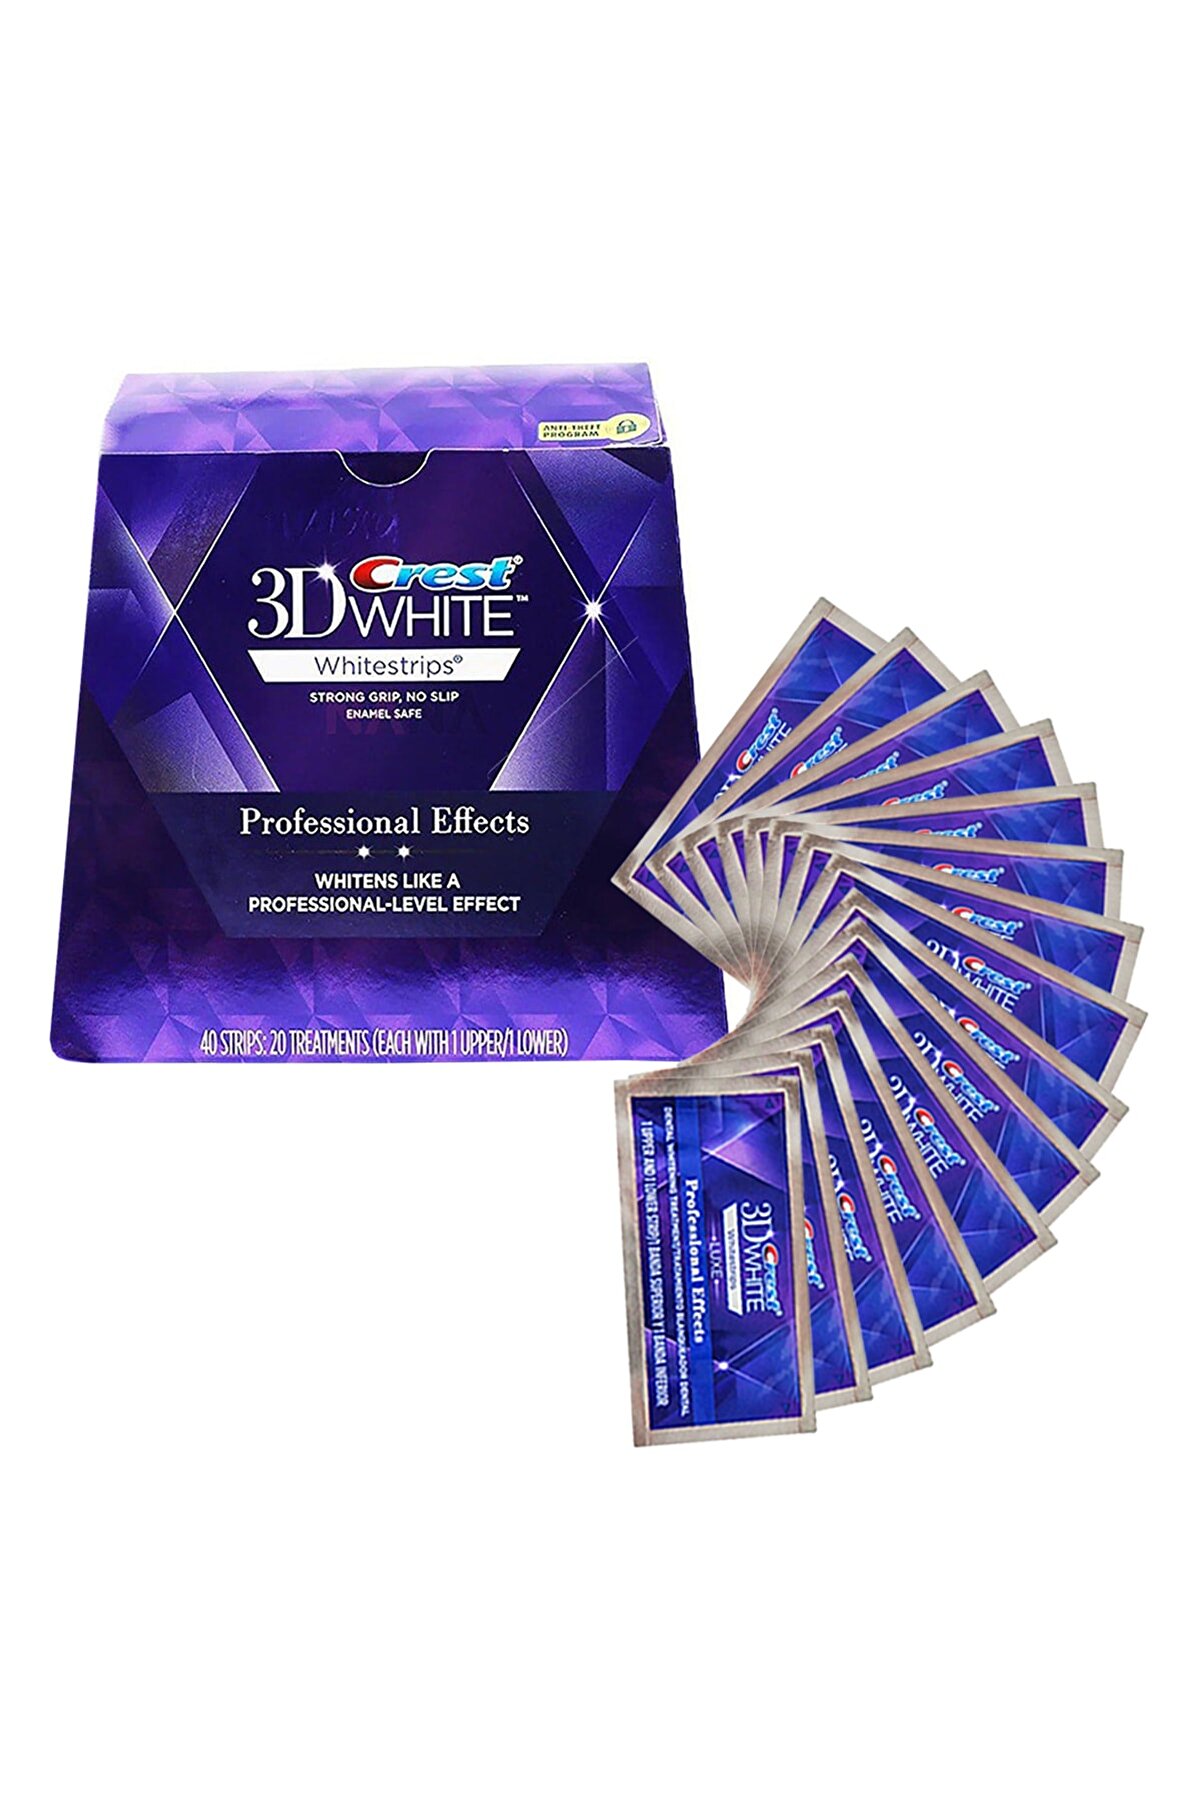 CREST 3d Whitestrips Professional Effects (15 Paket / 30 Bant)